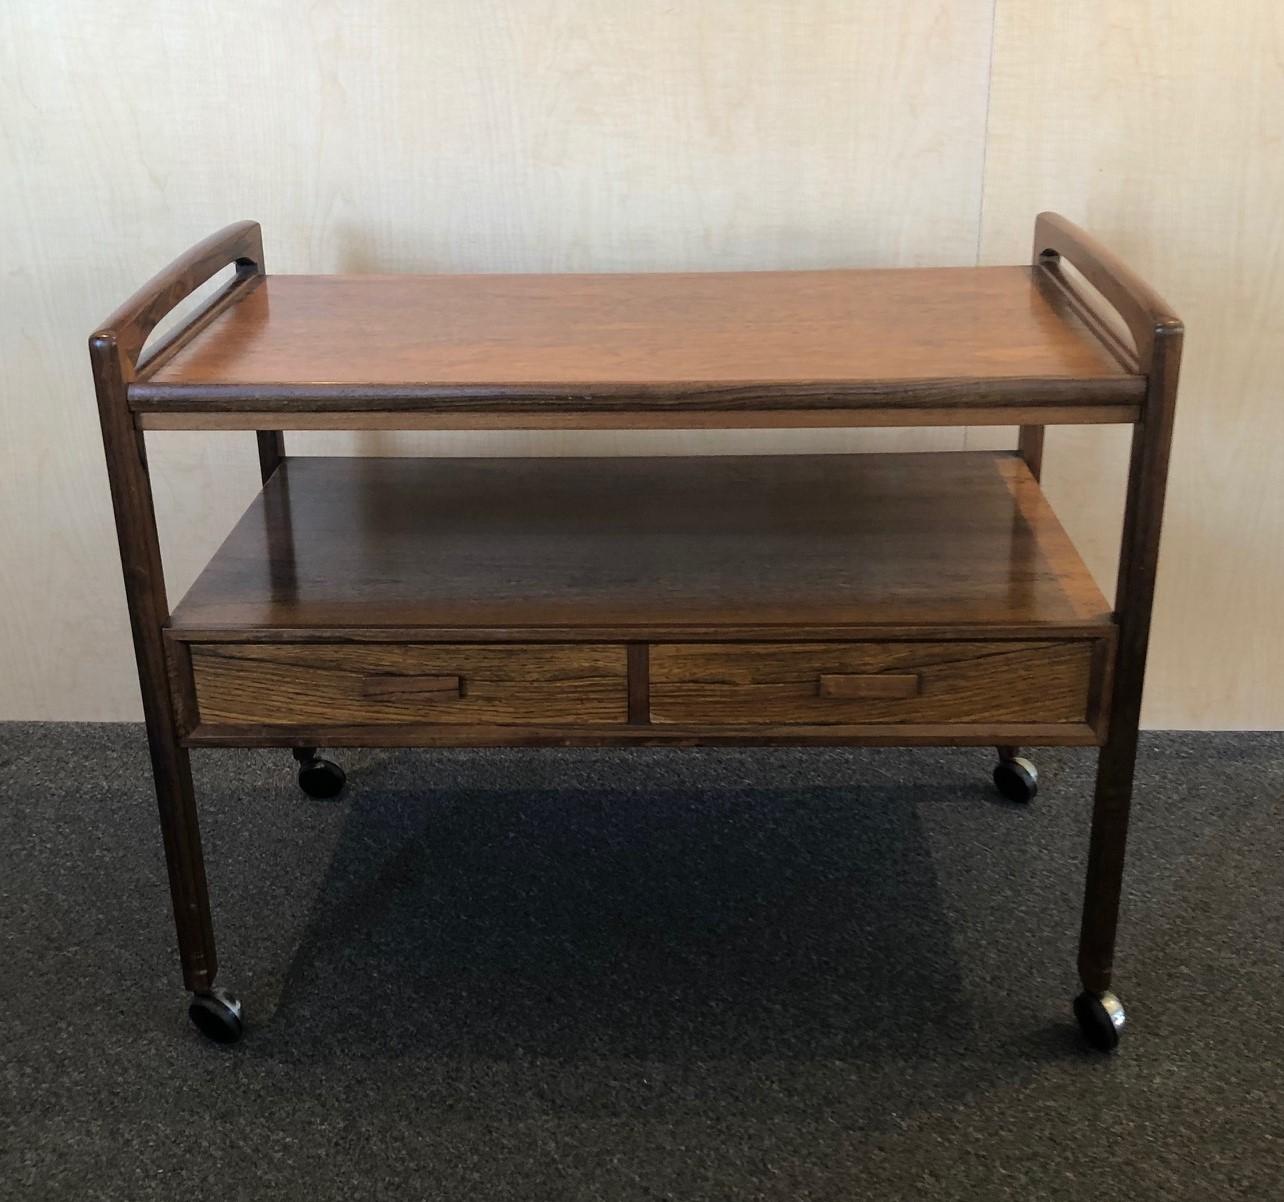 Rare Danish modern Brazilian rosewood bar / tea / TV cart by Arrebo Mobler of Denmark, circa 1960s. This trolley cart, which can be used as a side table, is typical of the Danish design during the 1960s with curved handles and rounded edges; it also